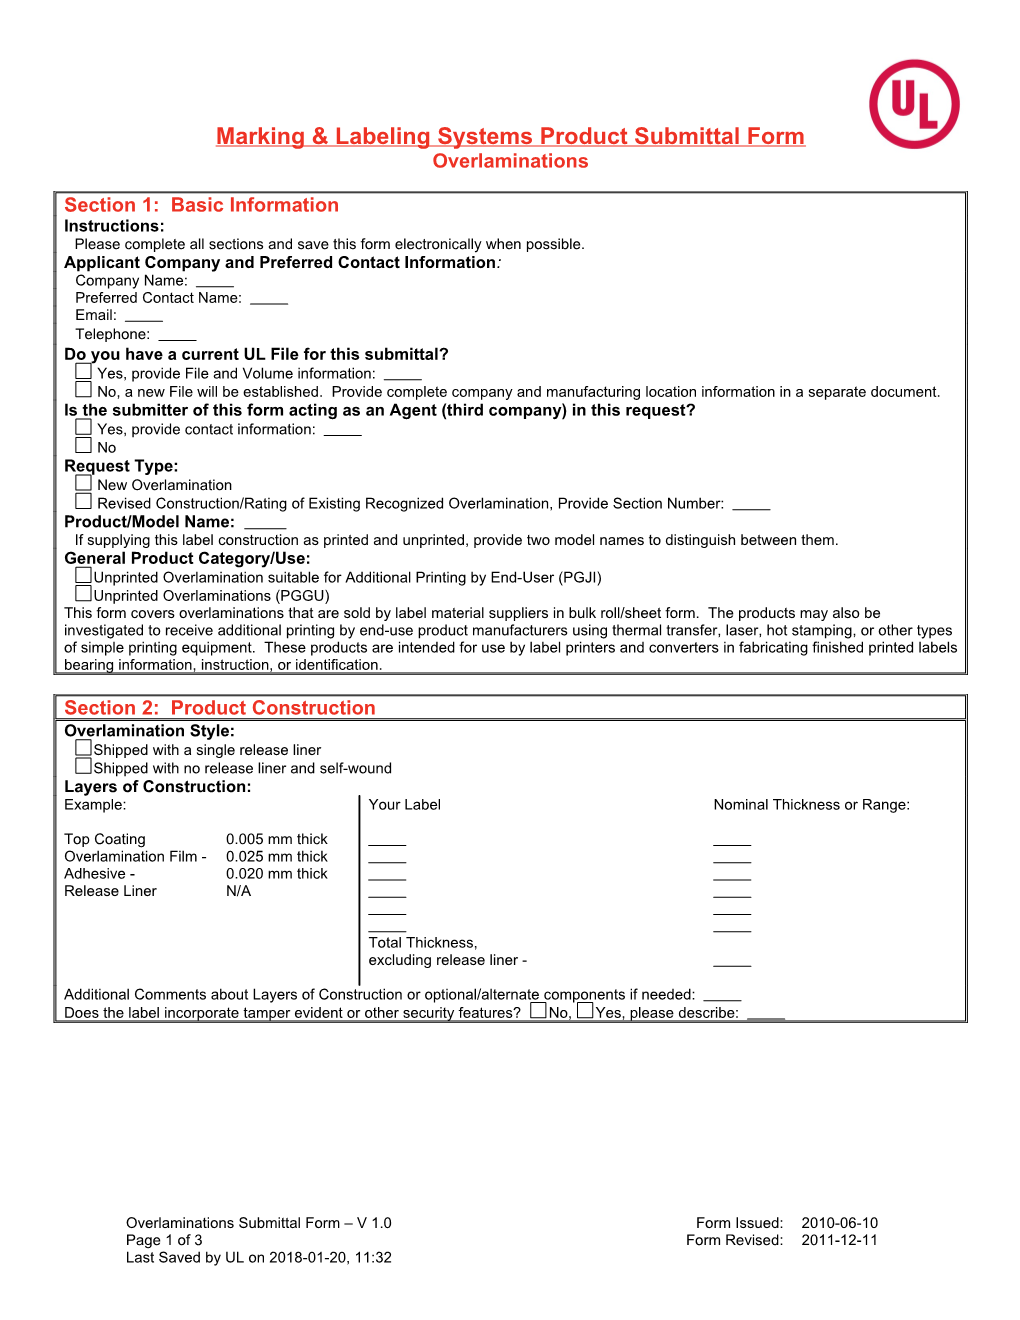 Product Submittal Information Gathering Form